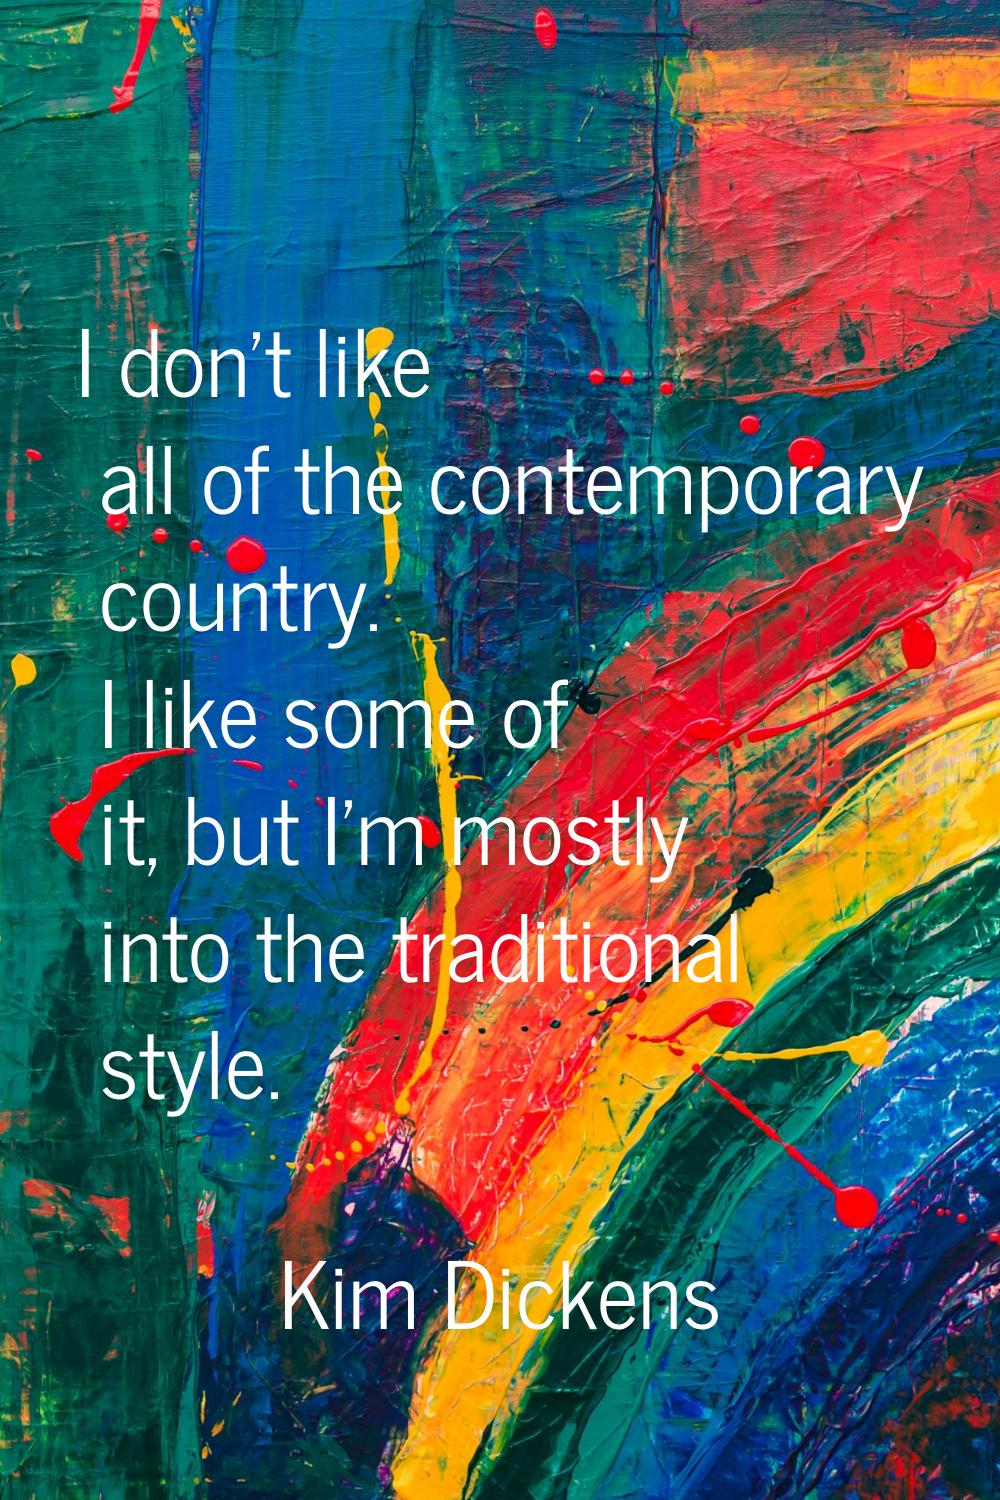 I don't like all of the contemporary country. I like some of it, but I'm mostly into the traditiona